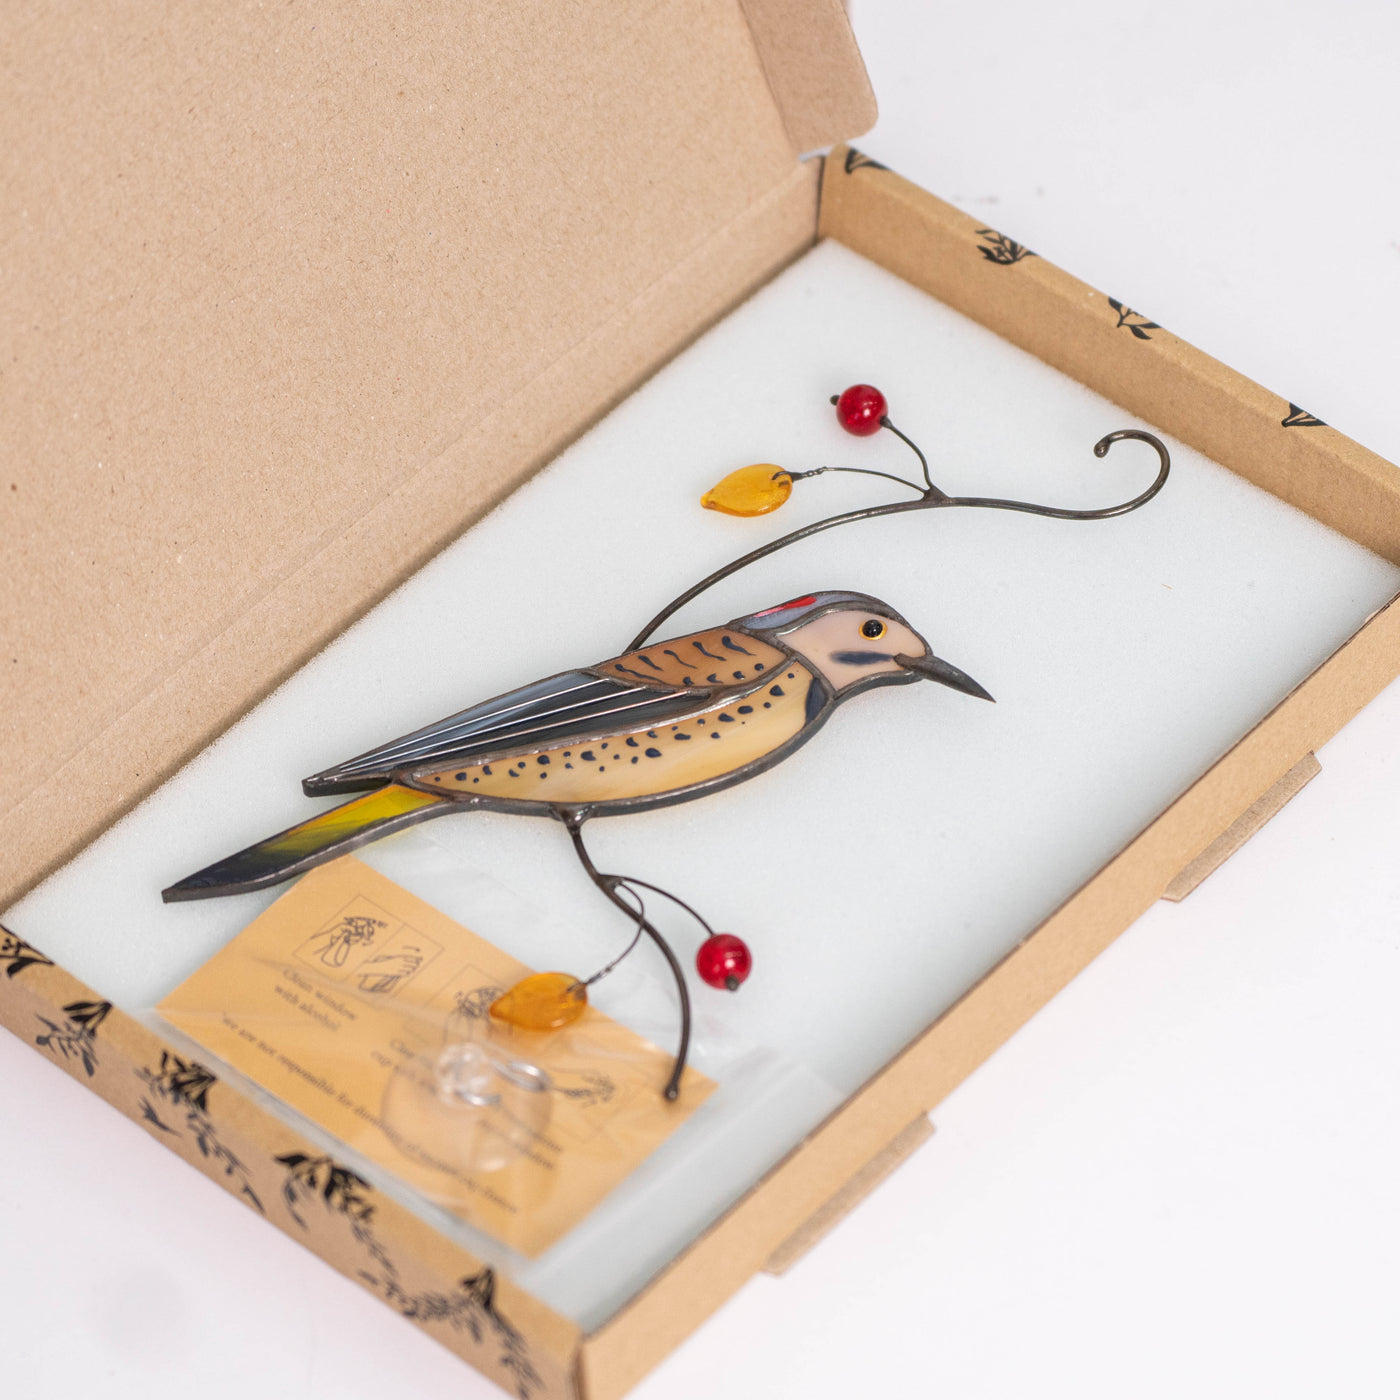 Stained glass northern flicker suncatcher in a brand box